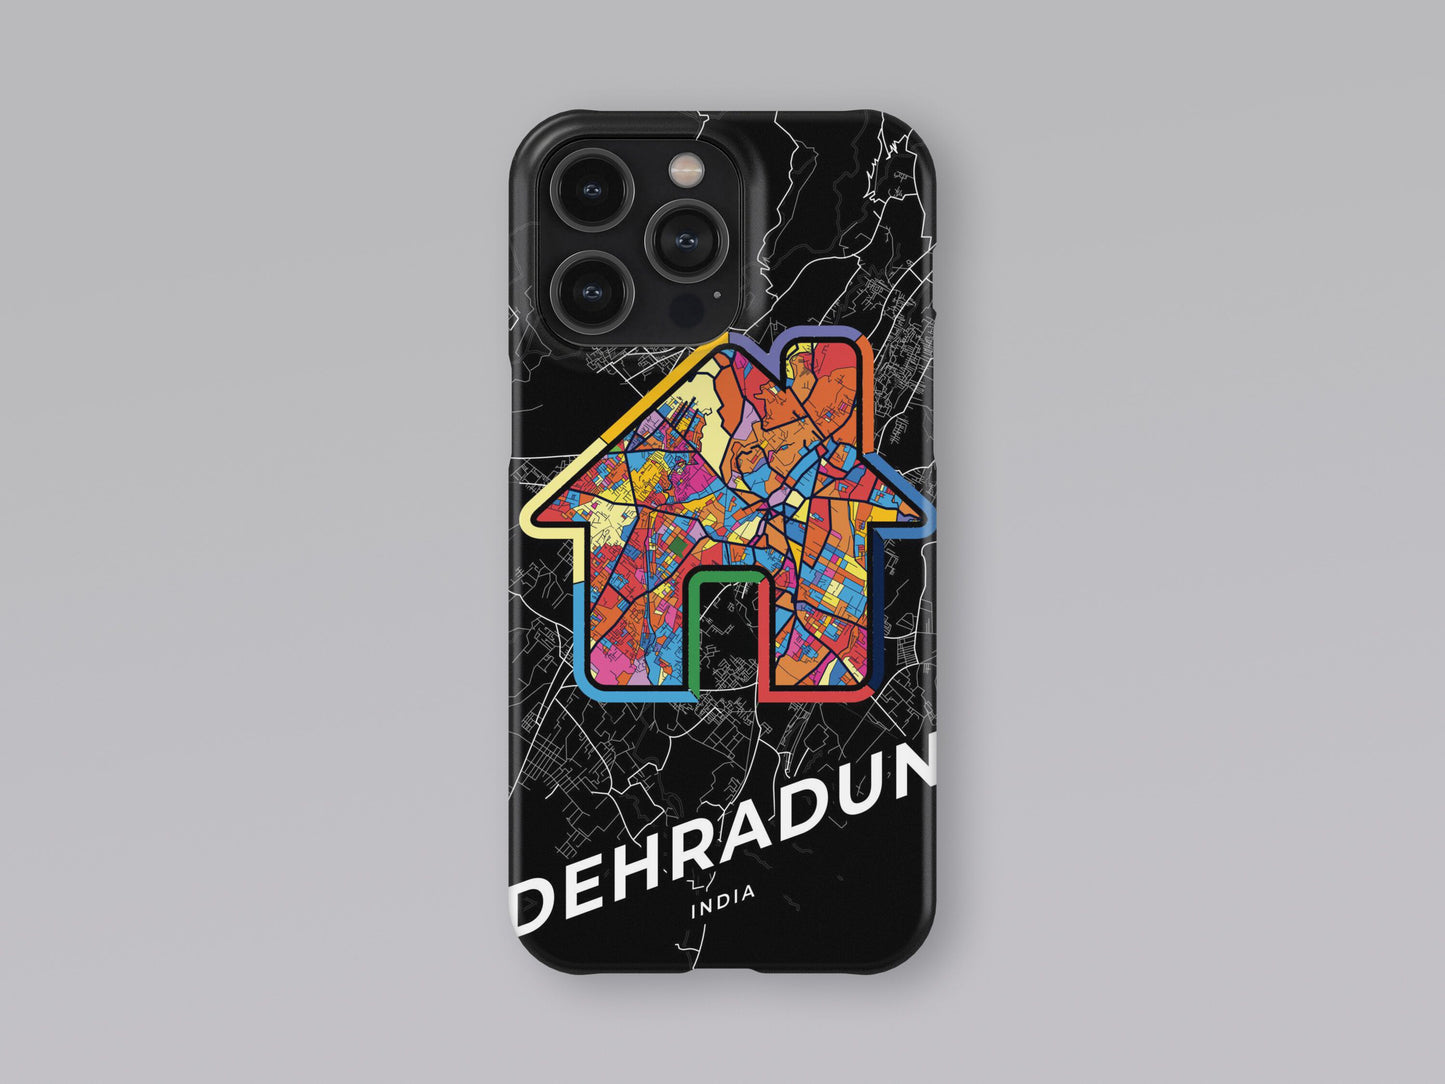 Dehradun India slim phone case with colorful icon. Birthday, wedding or housewarming gift. Couple match cases. 3